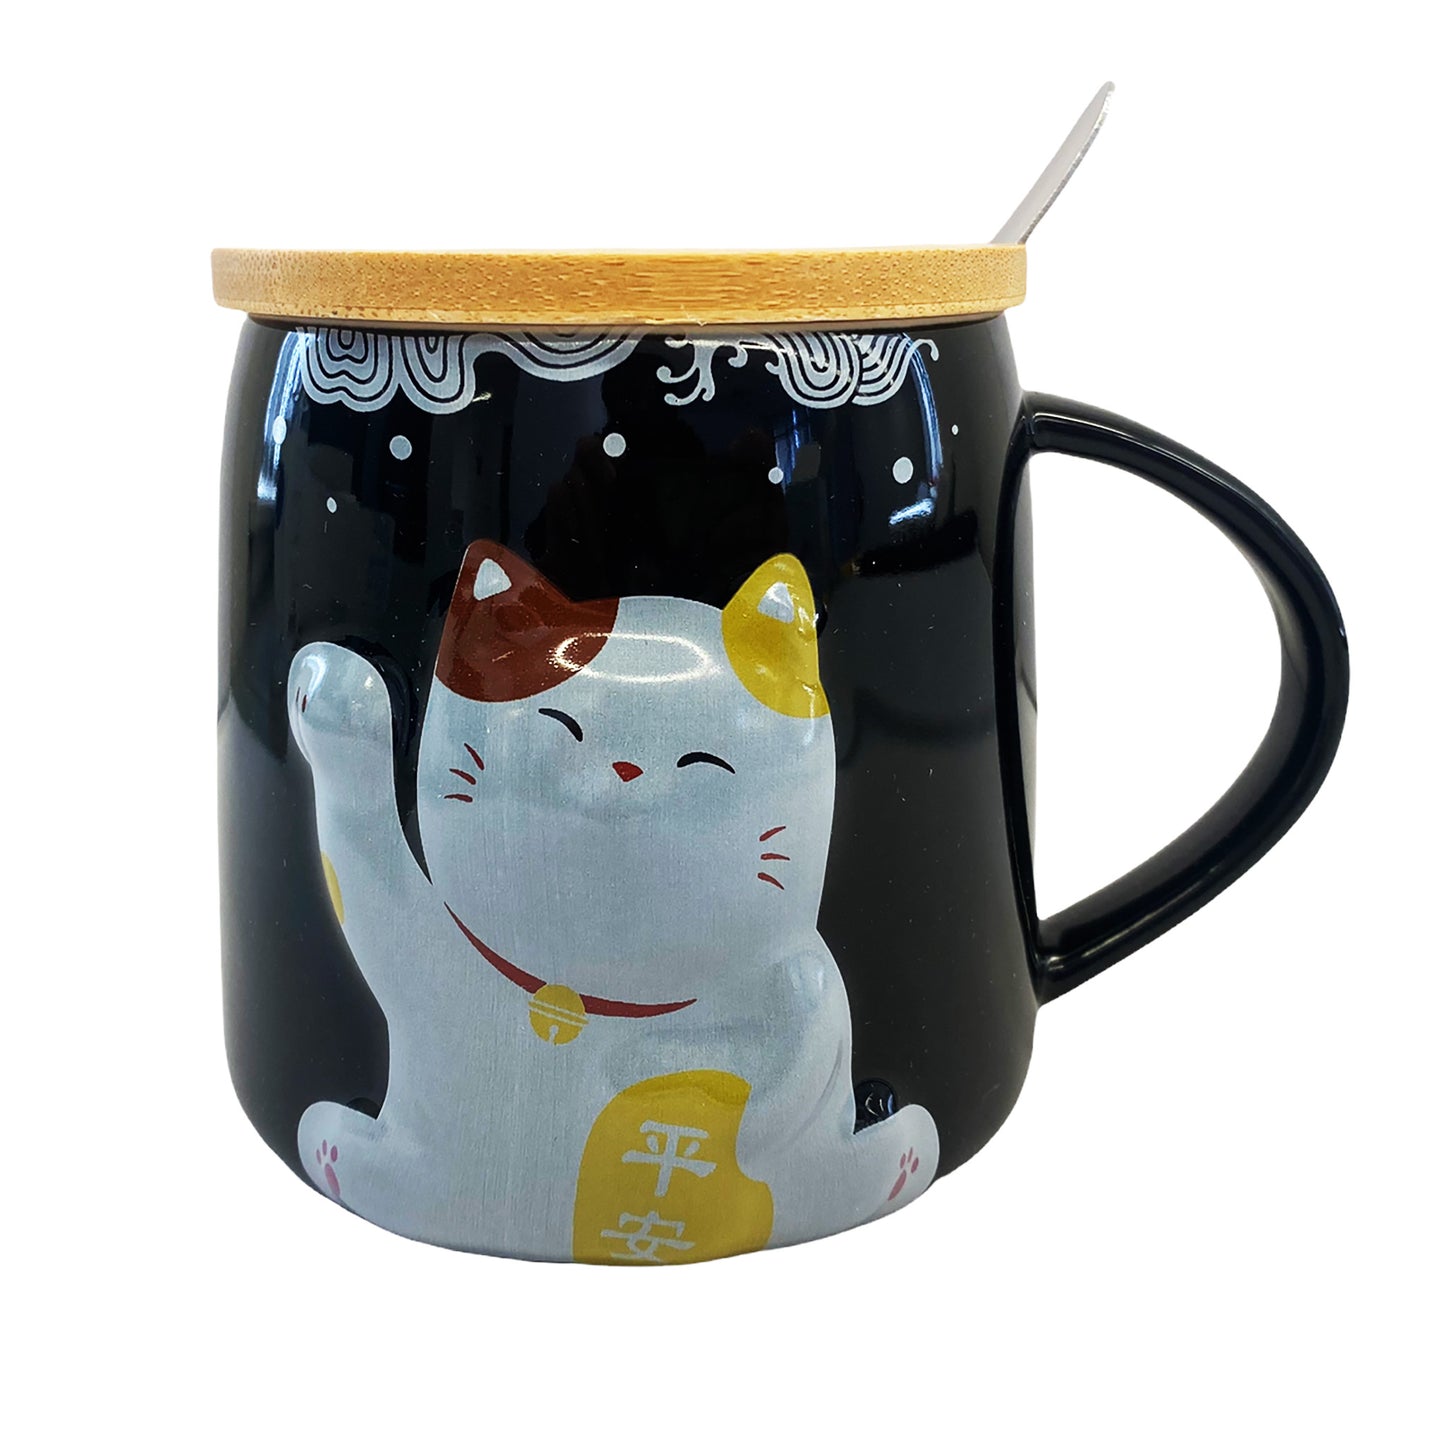 Front graphic view of Ceramic Mug with Lid & Spoon - Lucky Cat Black 3.25 inches 12oz 